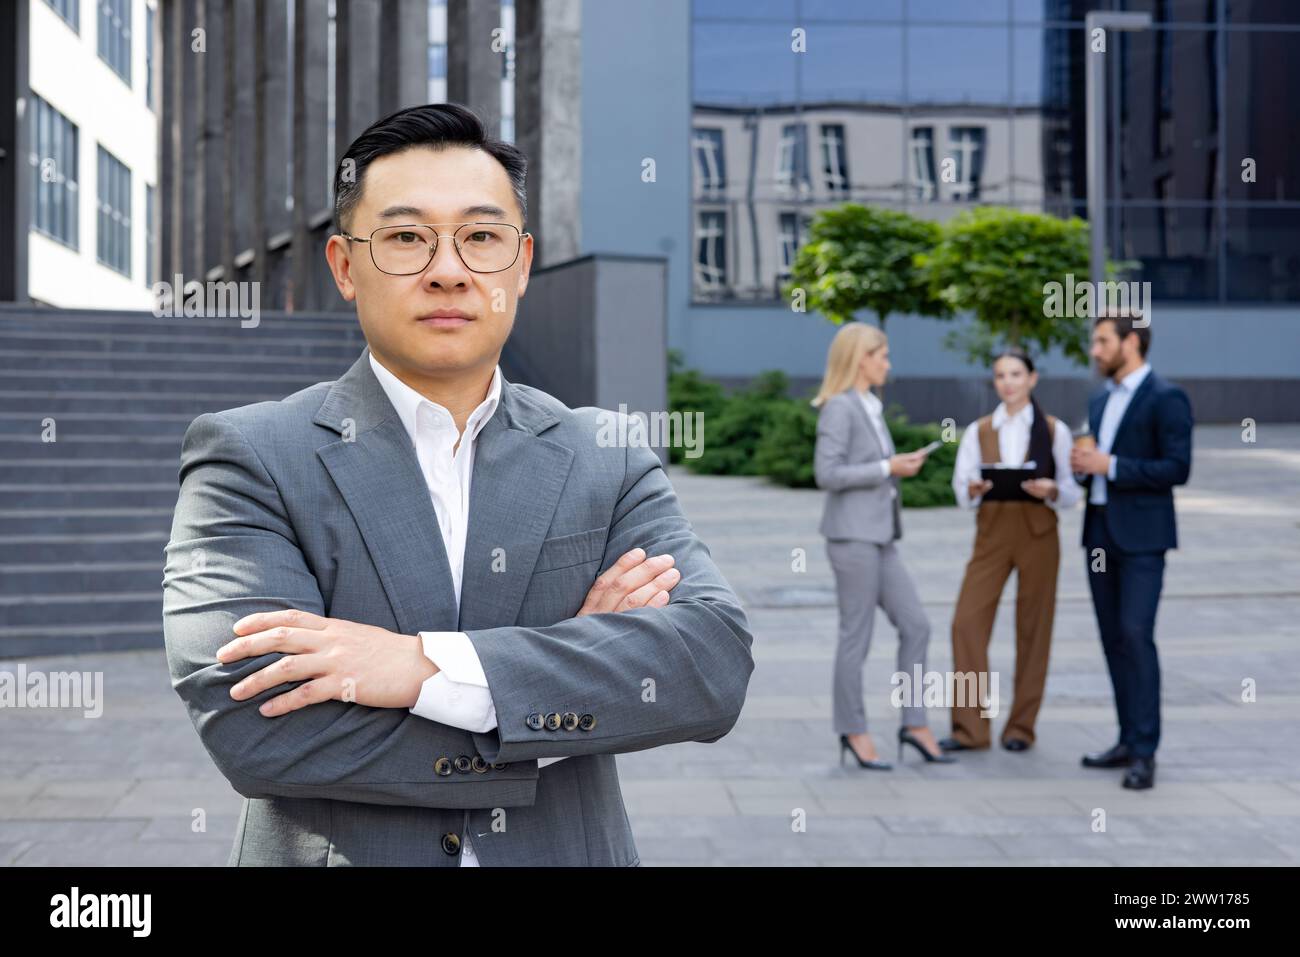 A poised businessman stands with arms crossed as his team discusses in the urban setting, embodying leadership and professionalism. Stock Photo